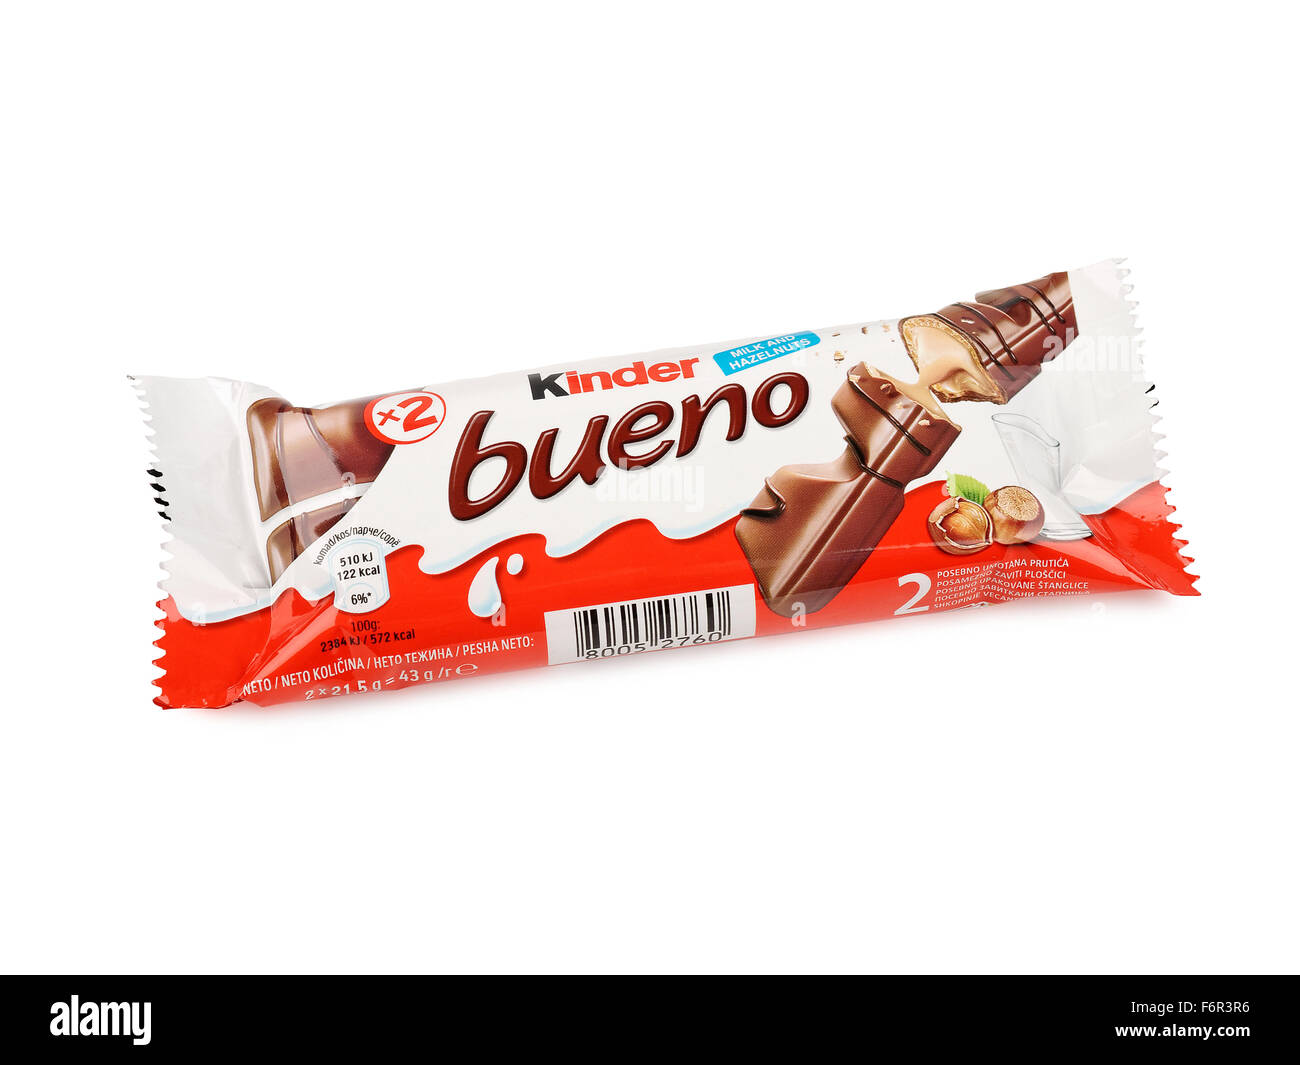 Kinder Bueno Chocolate Candy Bar. Kinder Bueno Is A Chocolate Bar Made By Italian Confectione Stock Photo